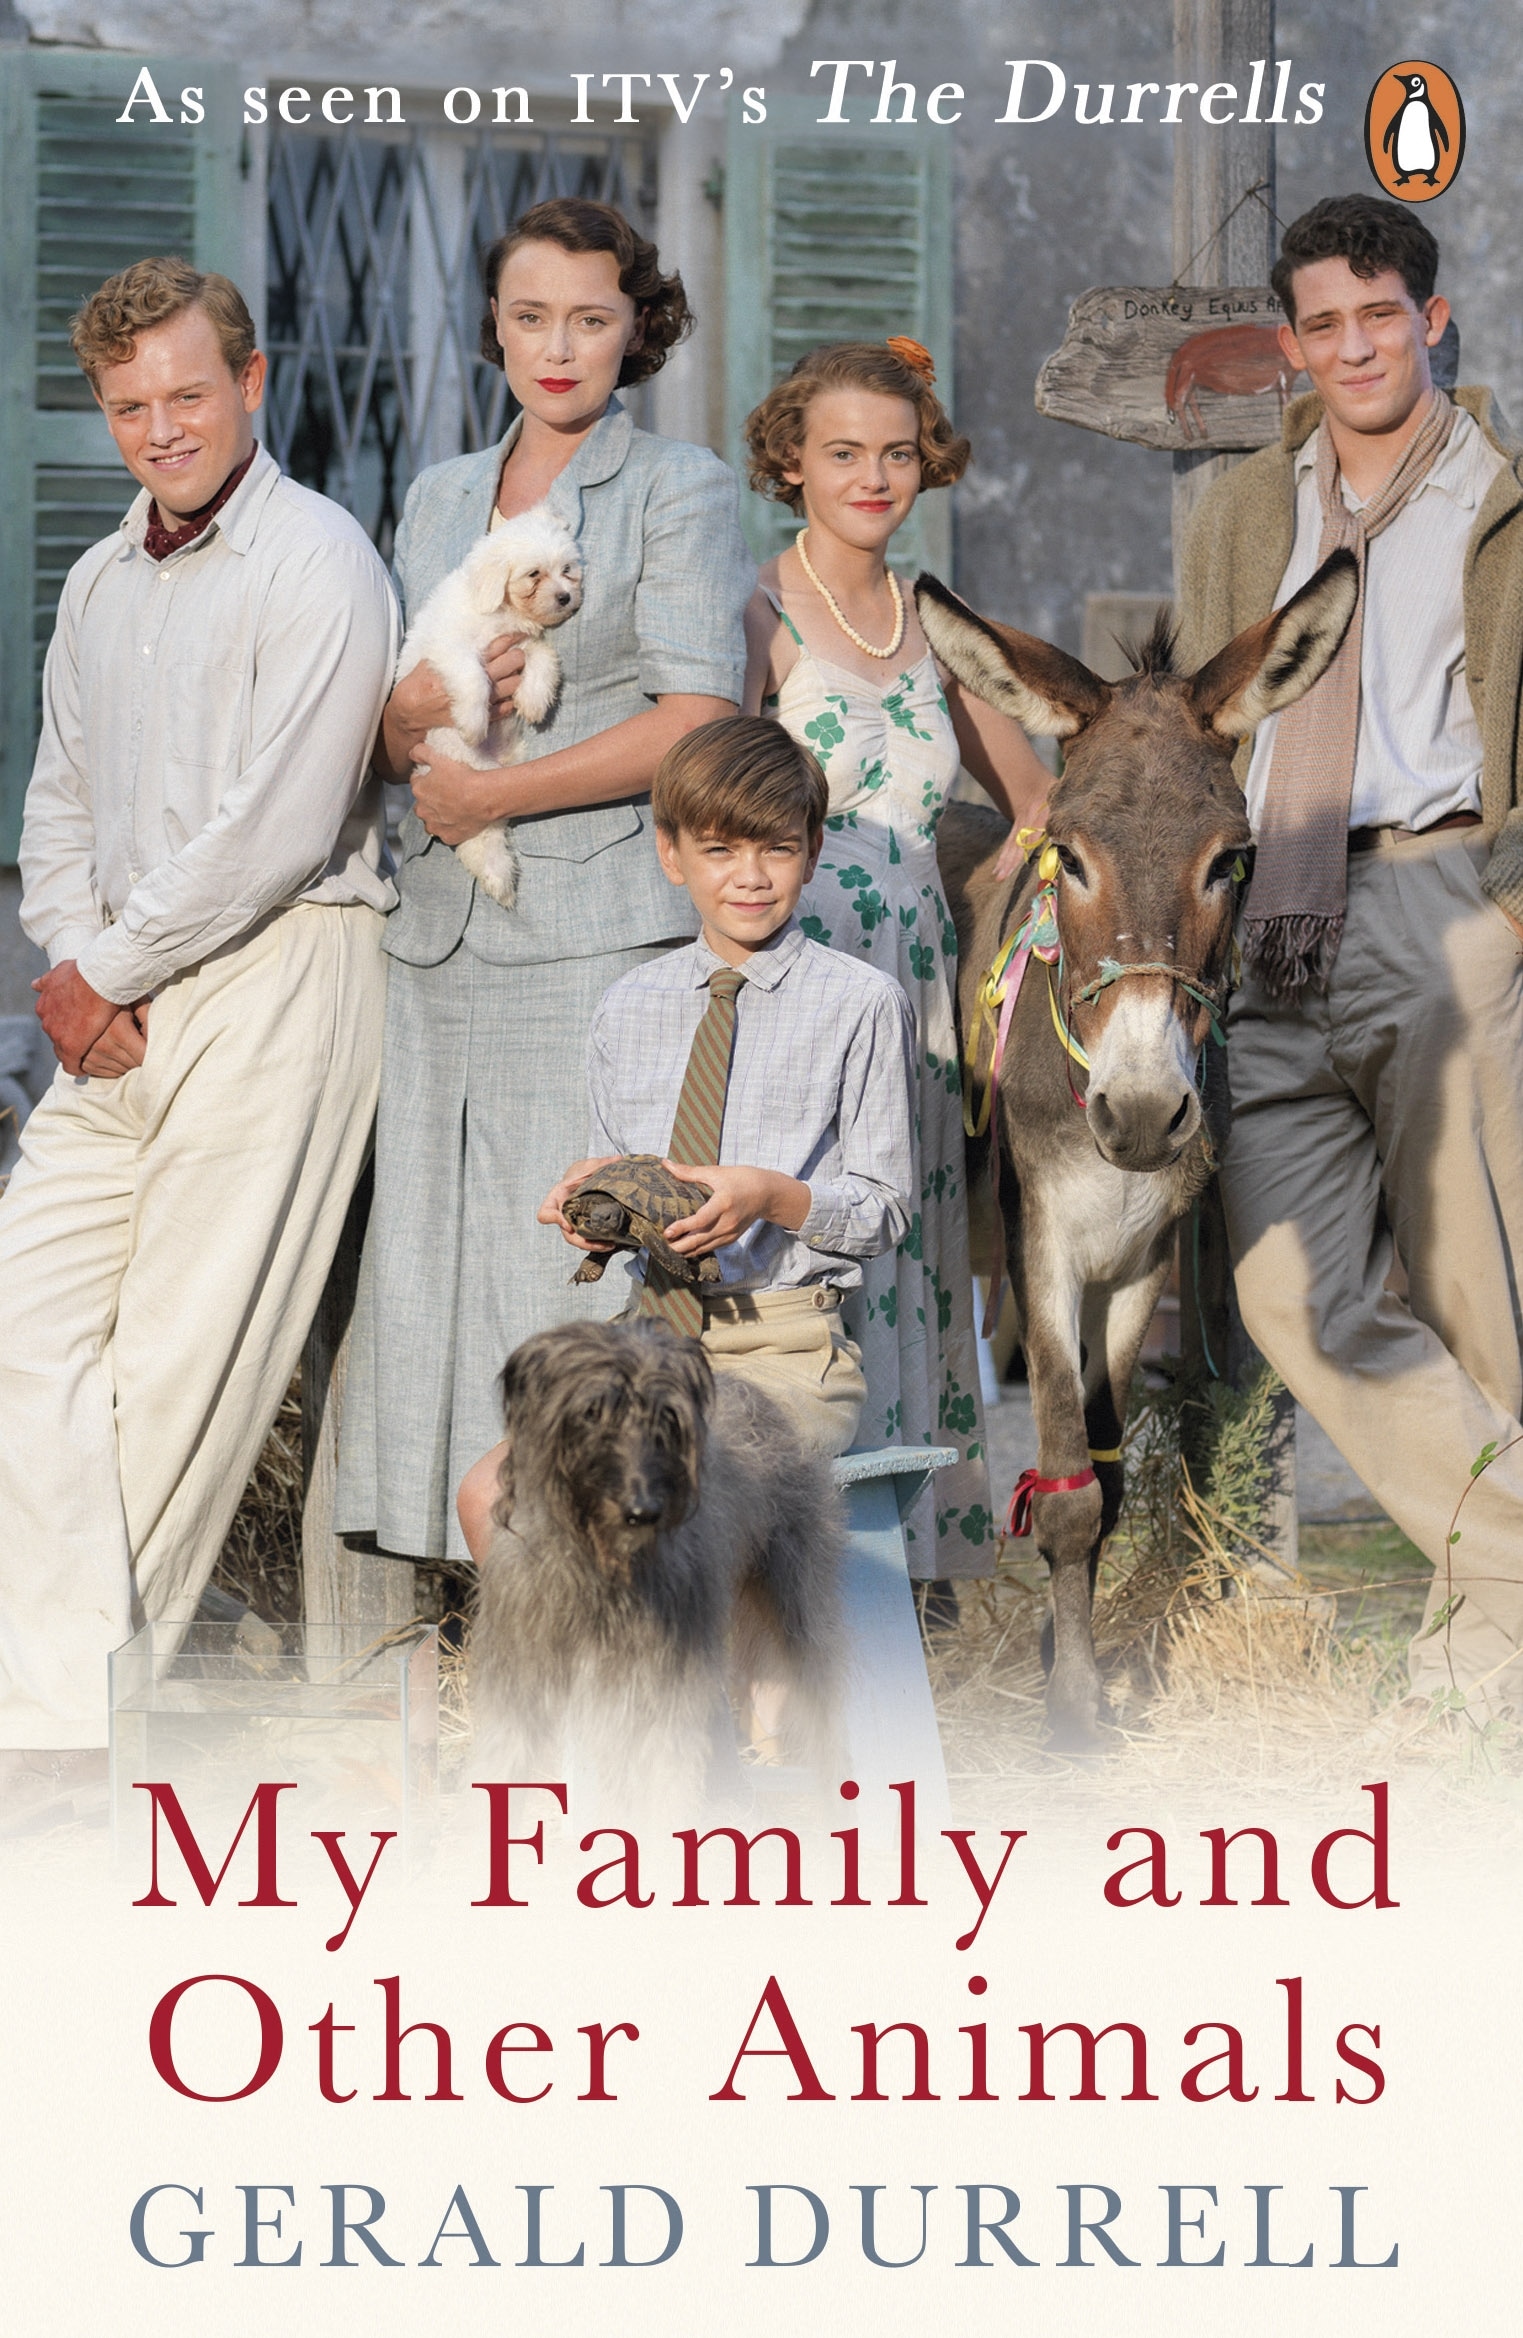 Book “My Family and Other Animals” by Gerald Durrell — March 3, 2016